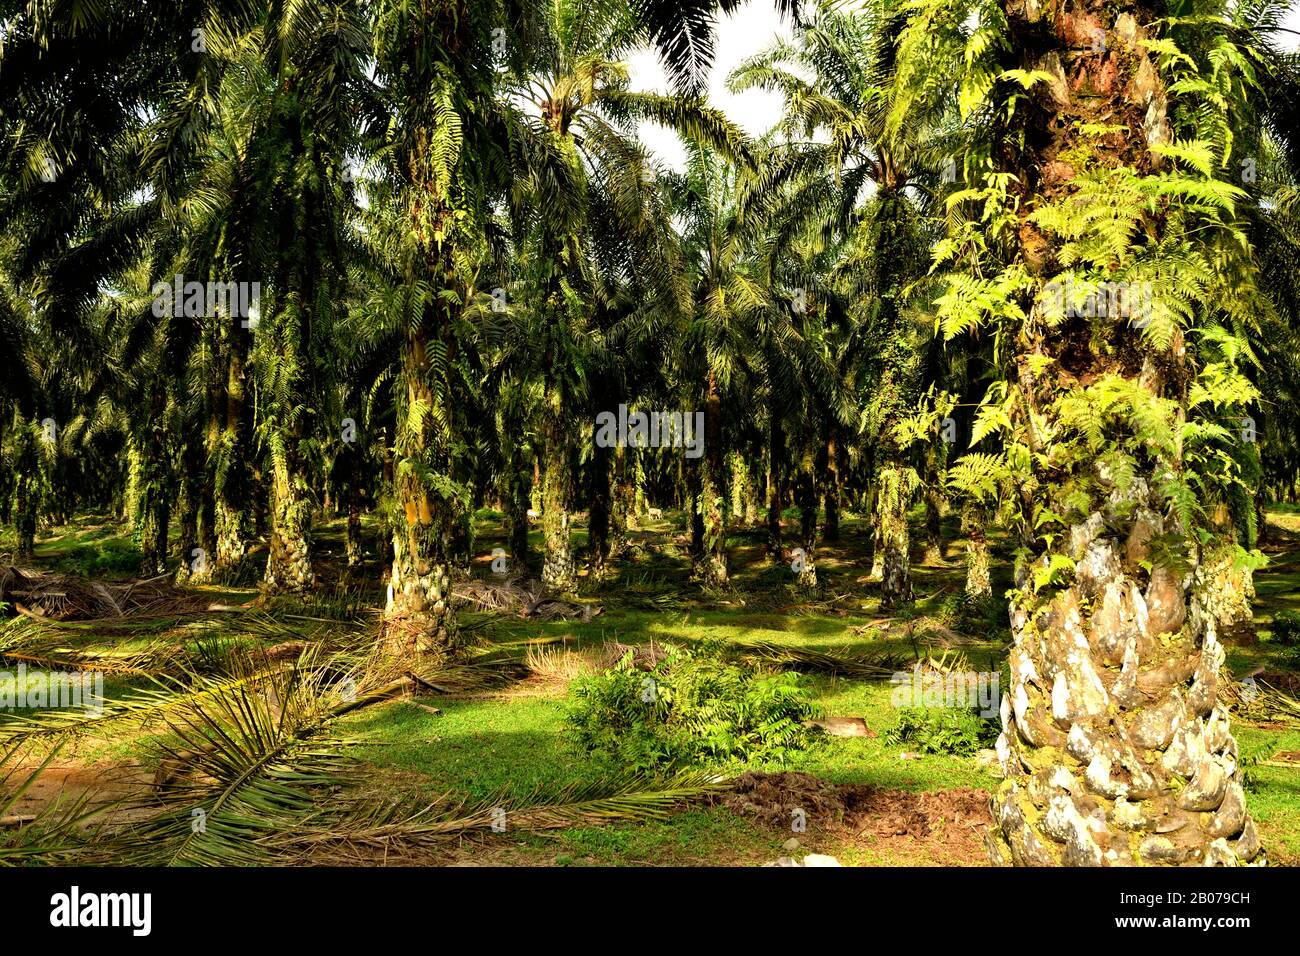 View of an oil palm plantation, after deforestation Stock Photo